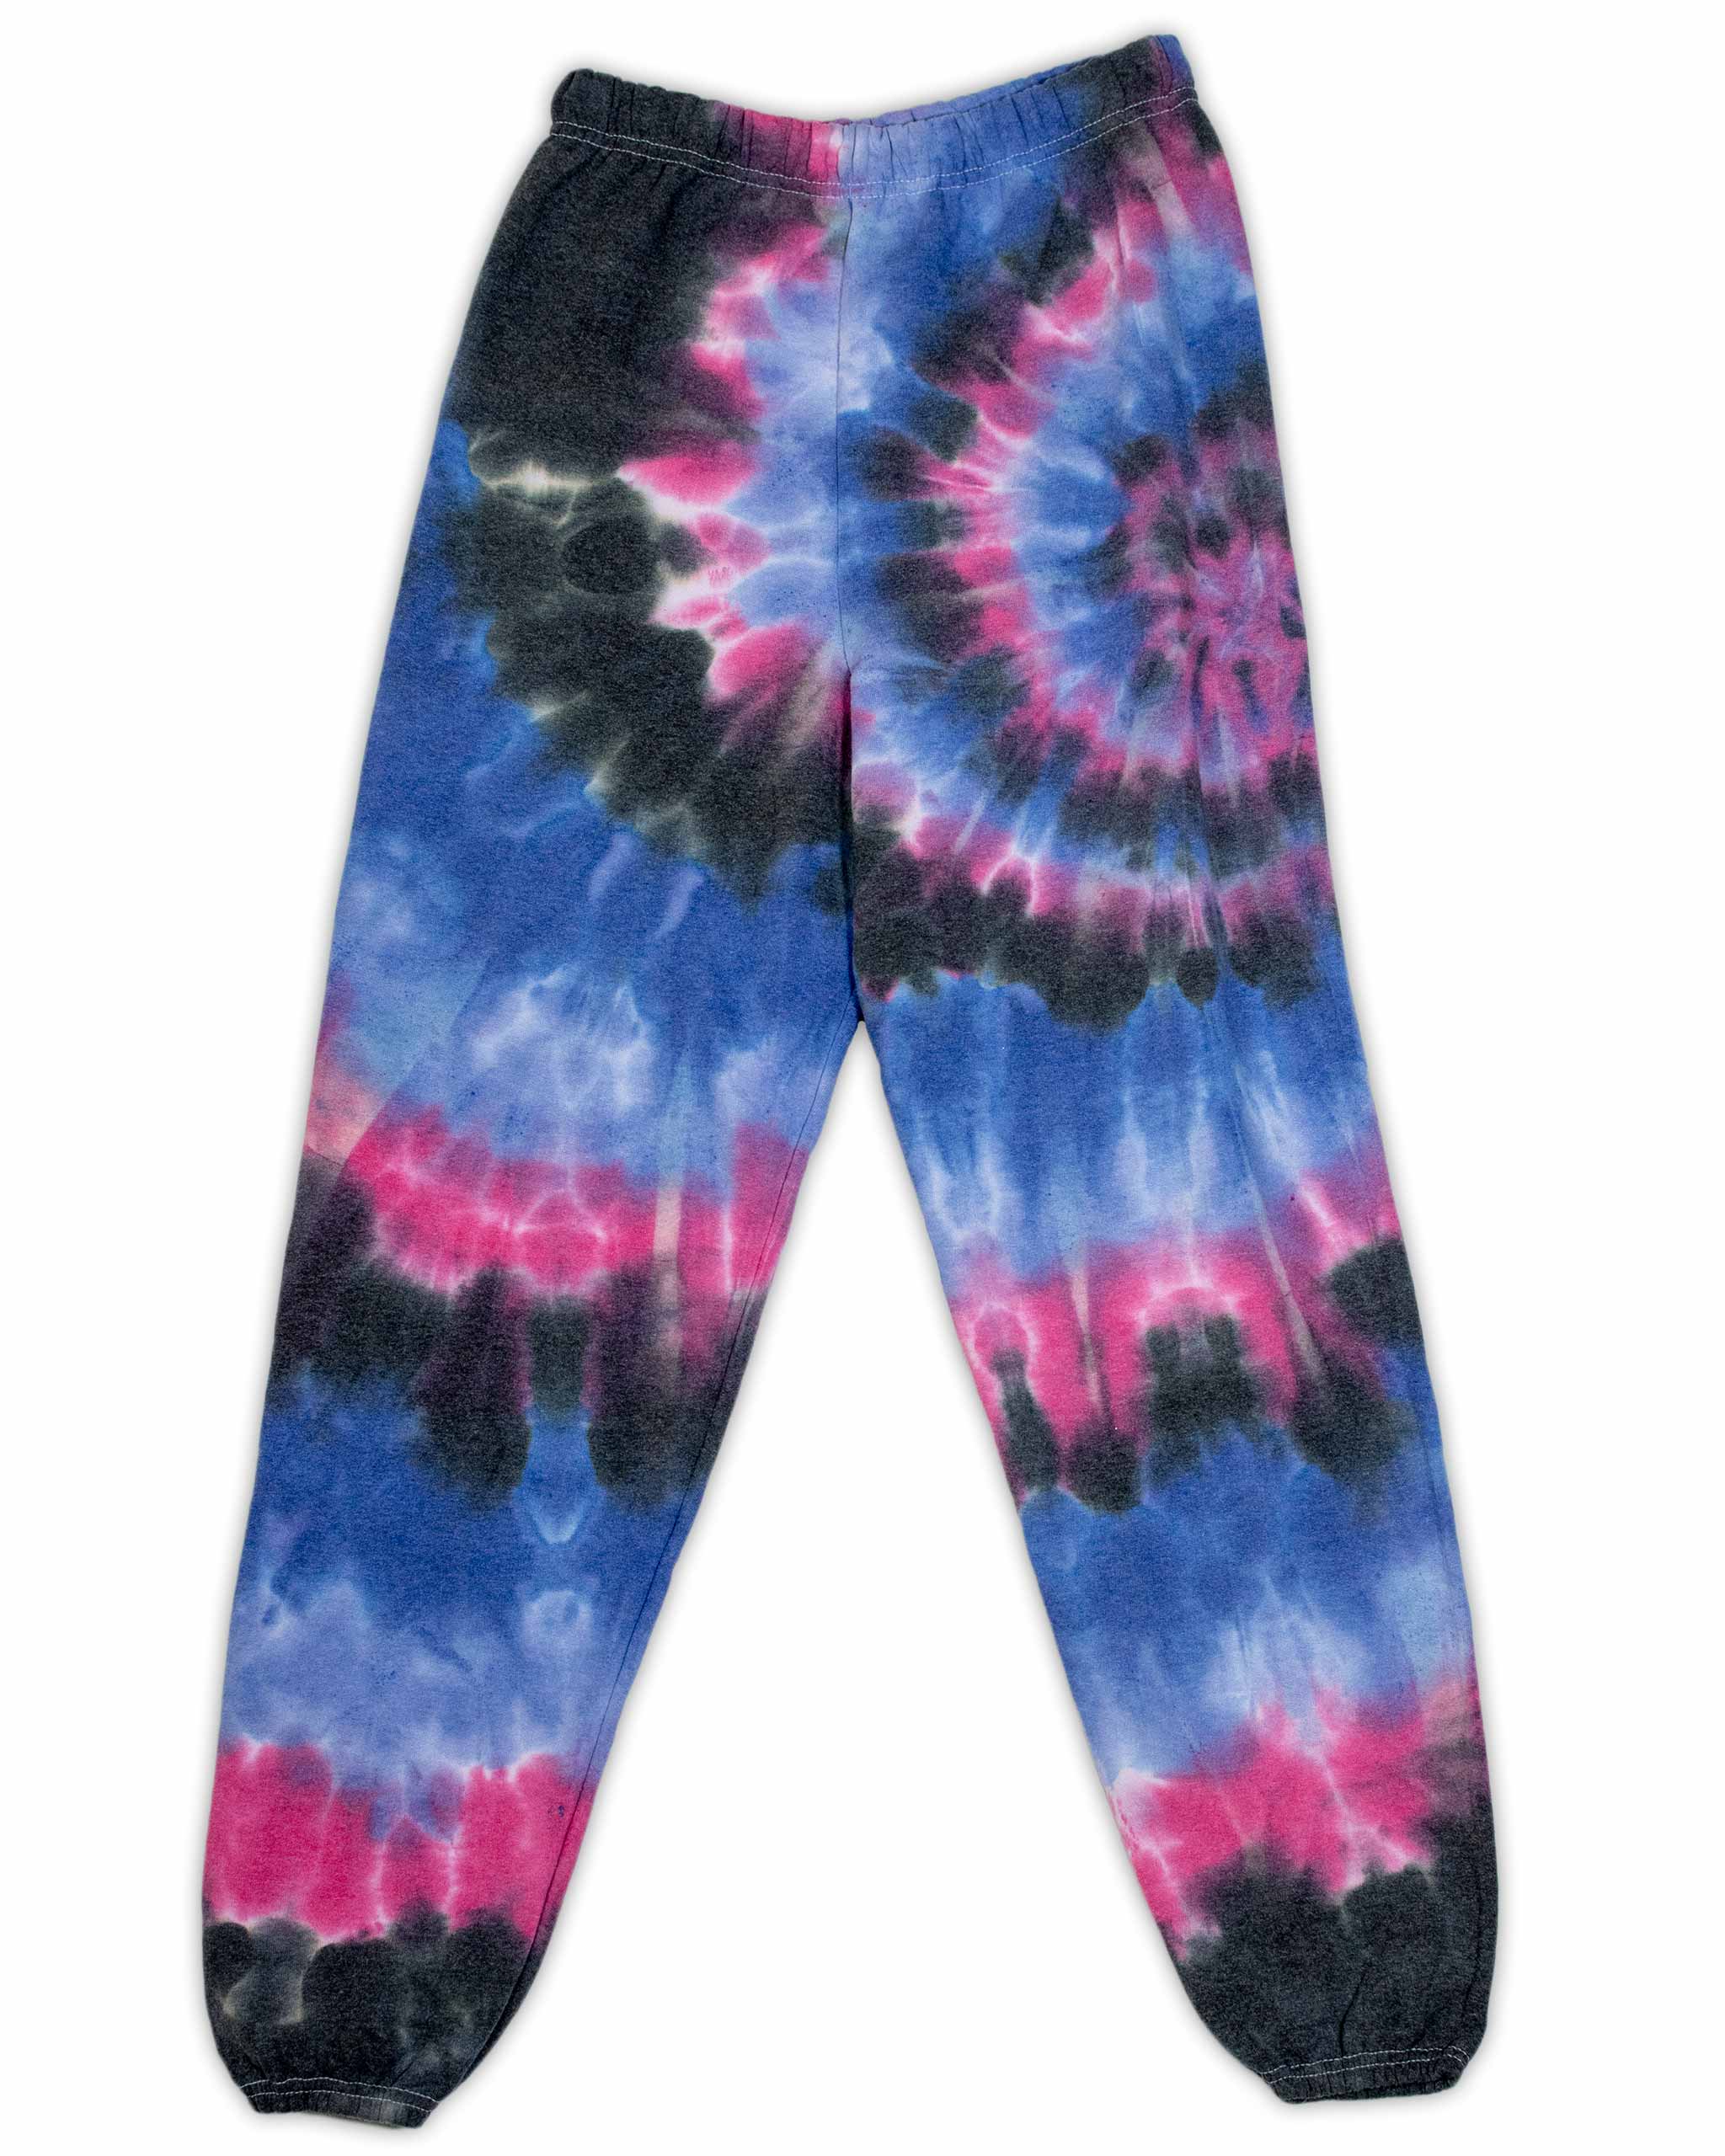 Galactic Spiral Sweatpants Small – Woof Dyes LLC